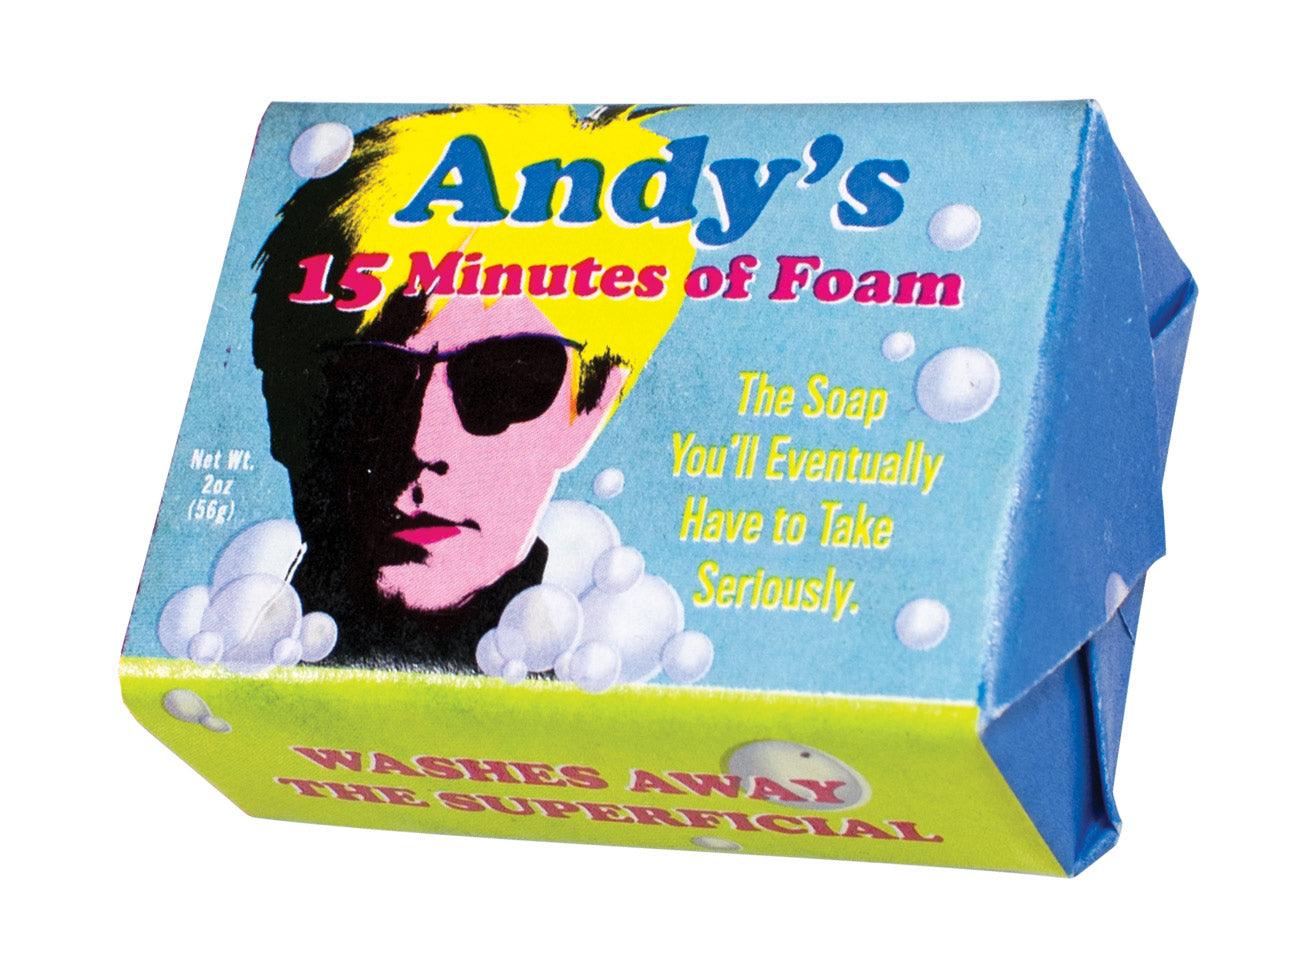 Product photo of Andy's 15 Minutes of Foam Soap, a novelty gift manufactured by The Unemployed Philosophers Guild.